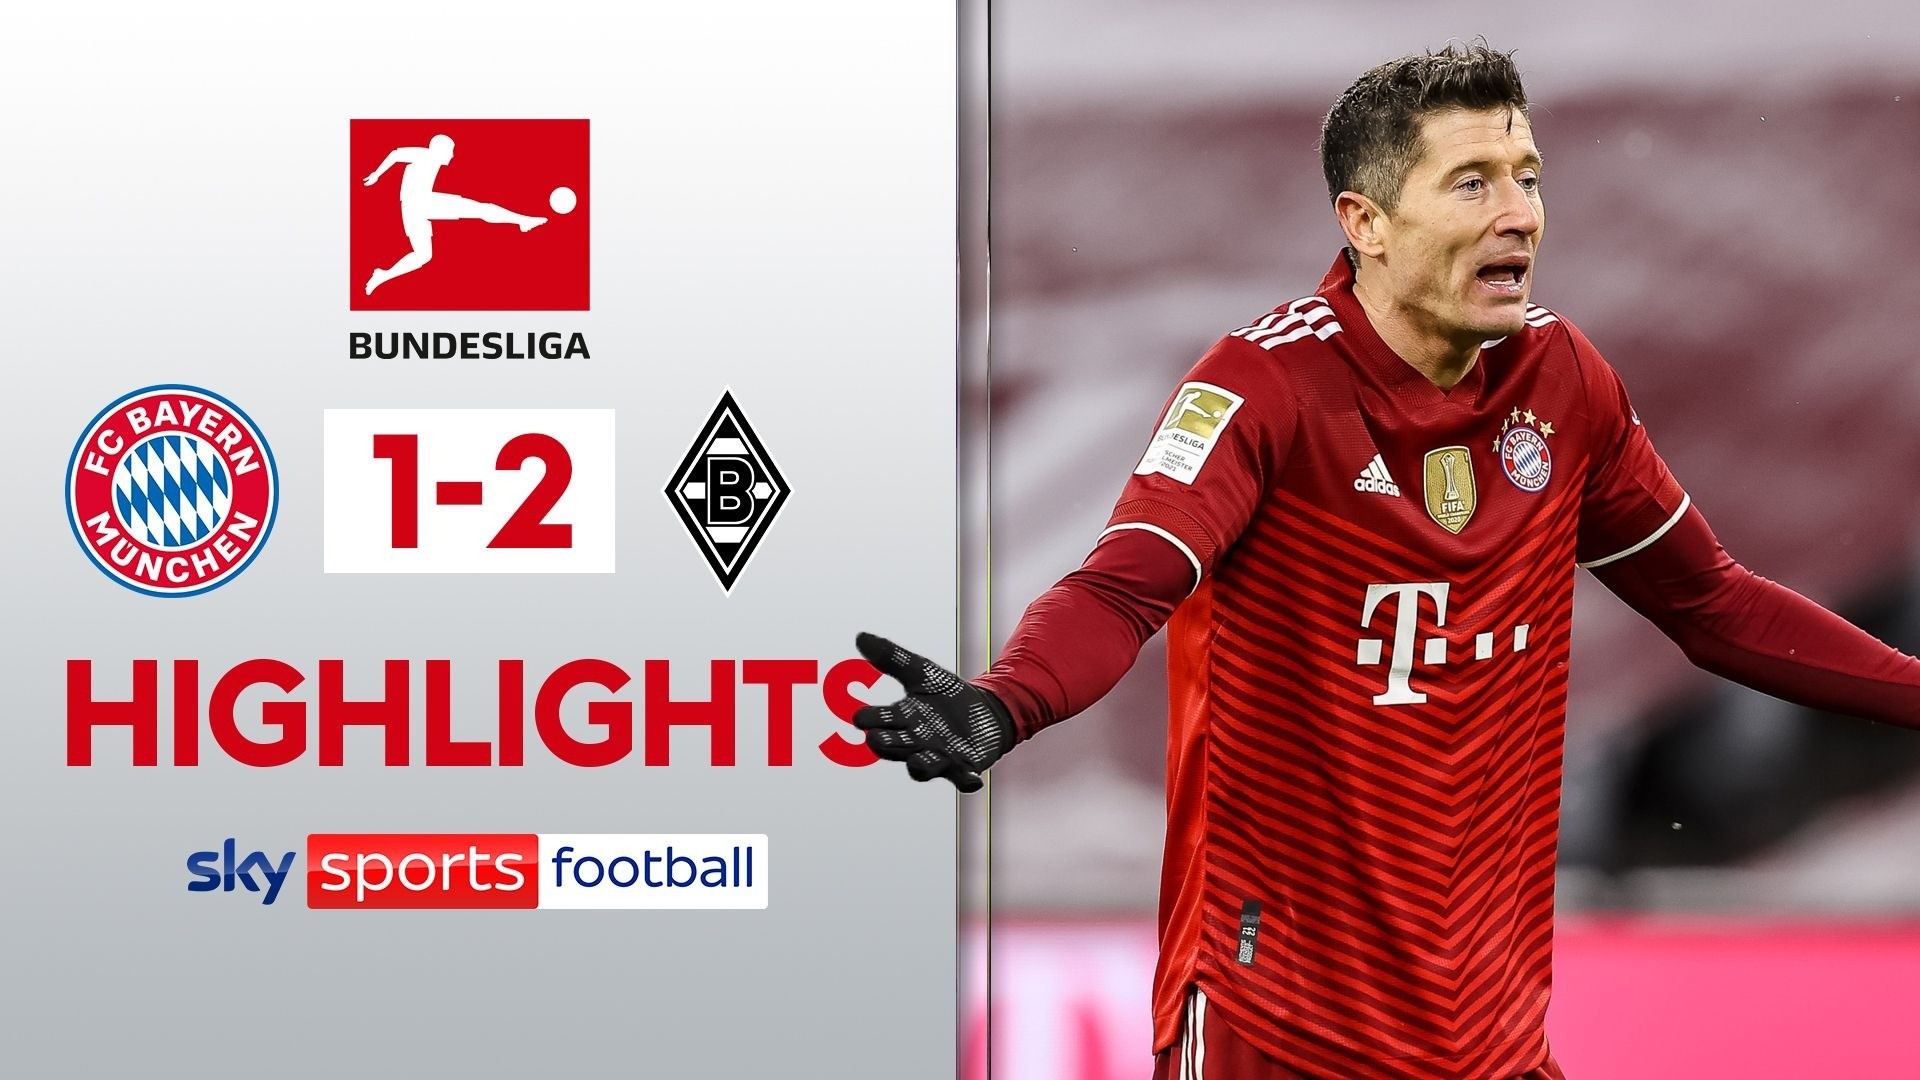 videnskabsmand Nægte Problemer Sky Sports Football on Twitter: "Bayern Munich conceded two goals in four  minutes to suffer a shock 2-1 loss to visitors Borussia Monchengladbach 😳  Full Bundesliga highlights 🎥👇 https://t.co/JHCModQij0" / Twitter